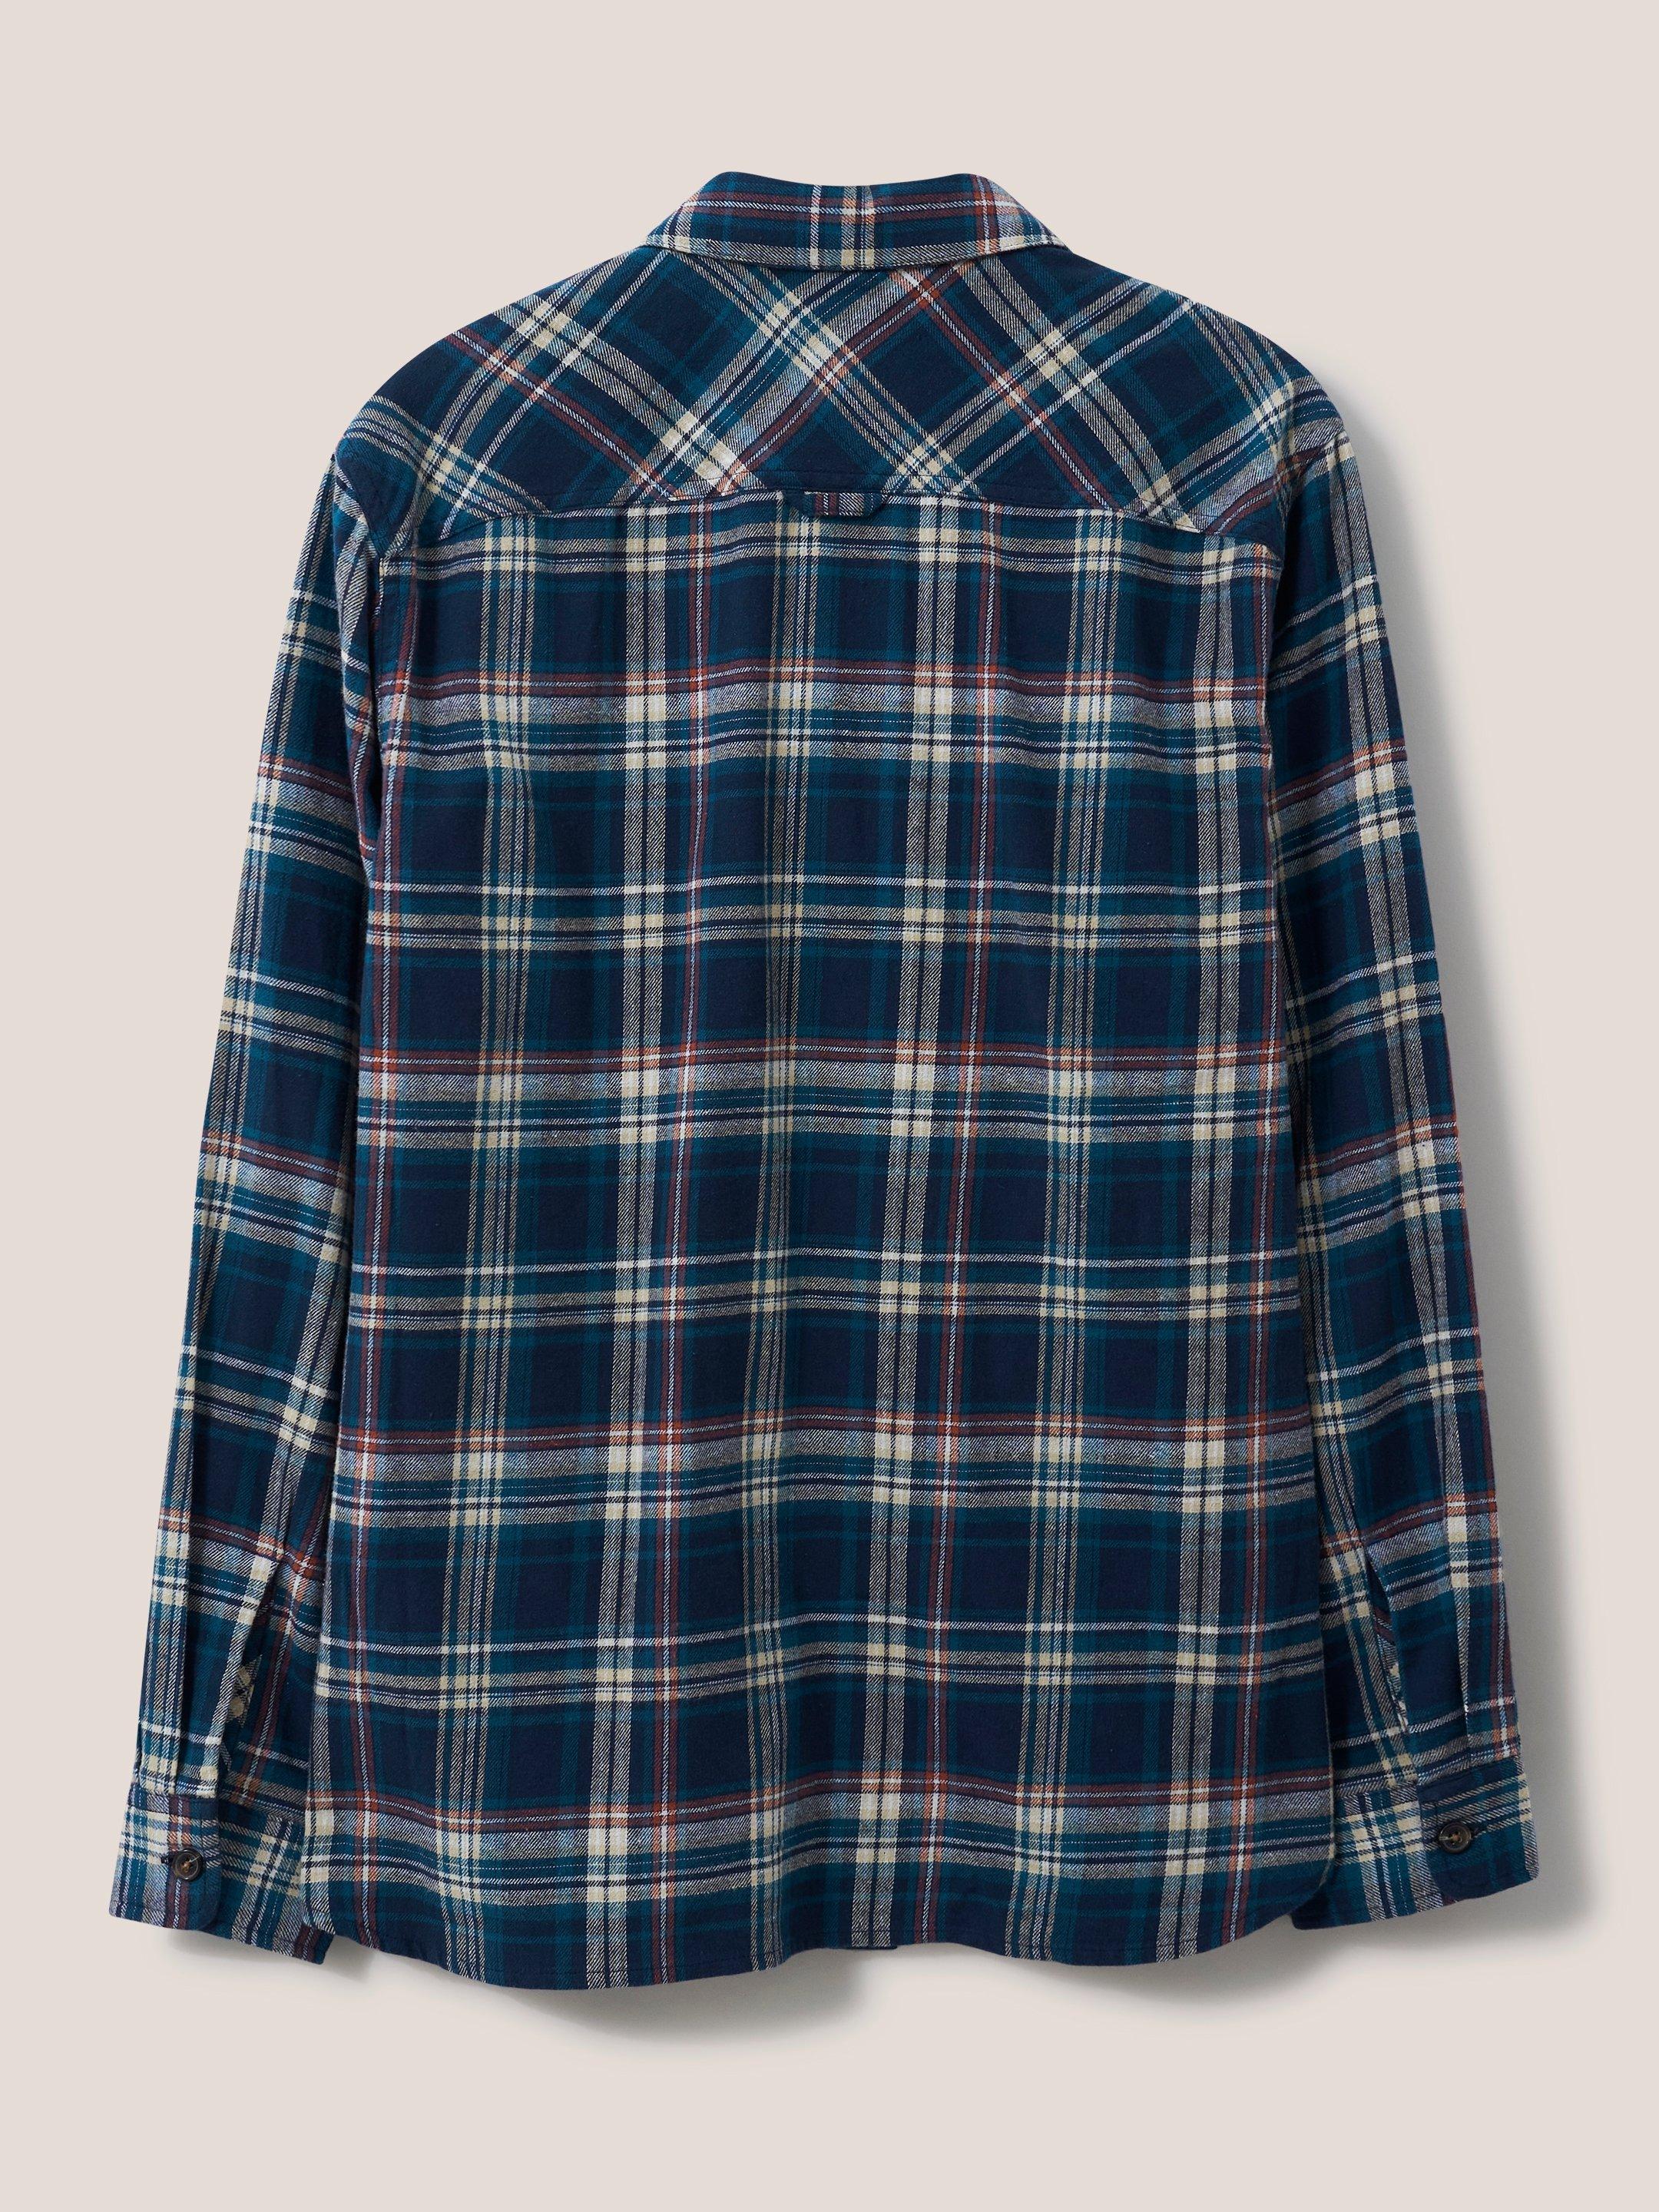 Moxley Flannel Check Shirt in DARK NAVY - FLAT BACK